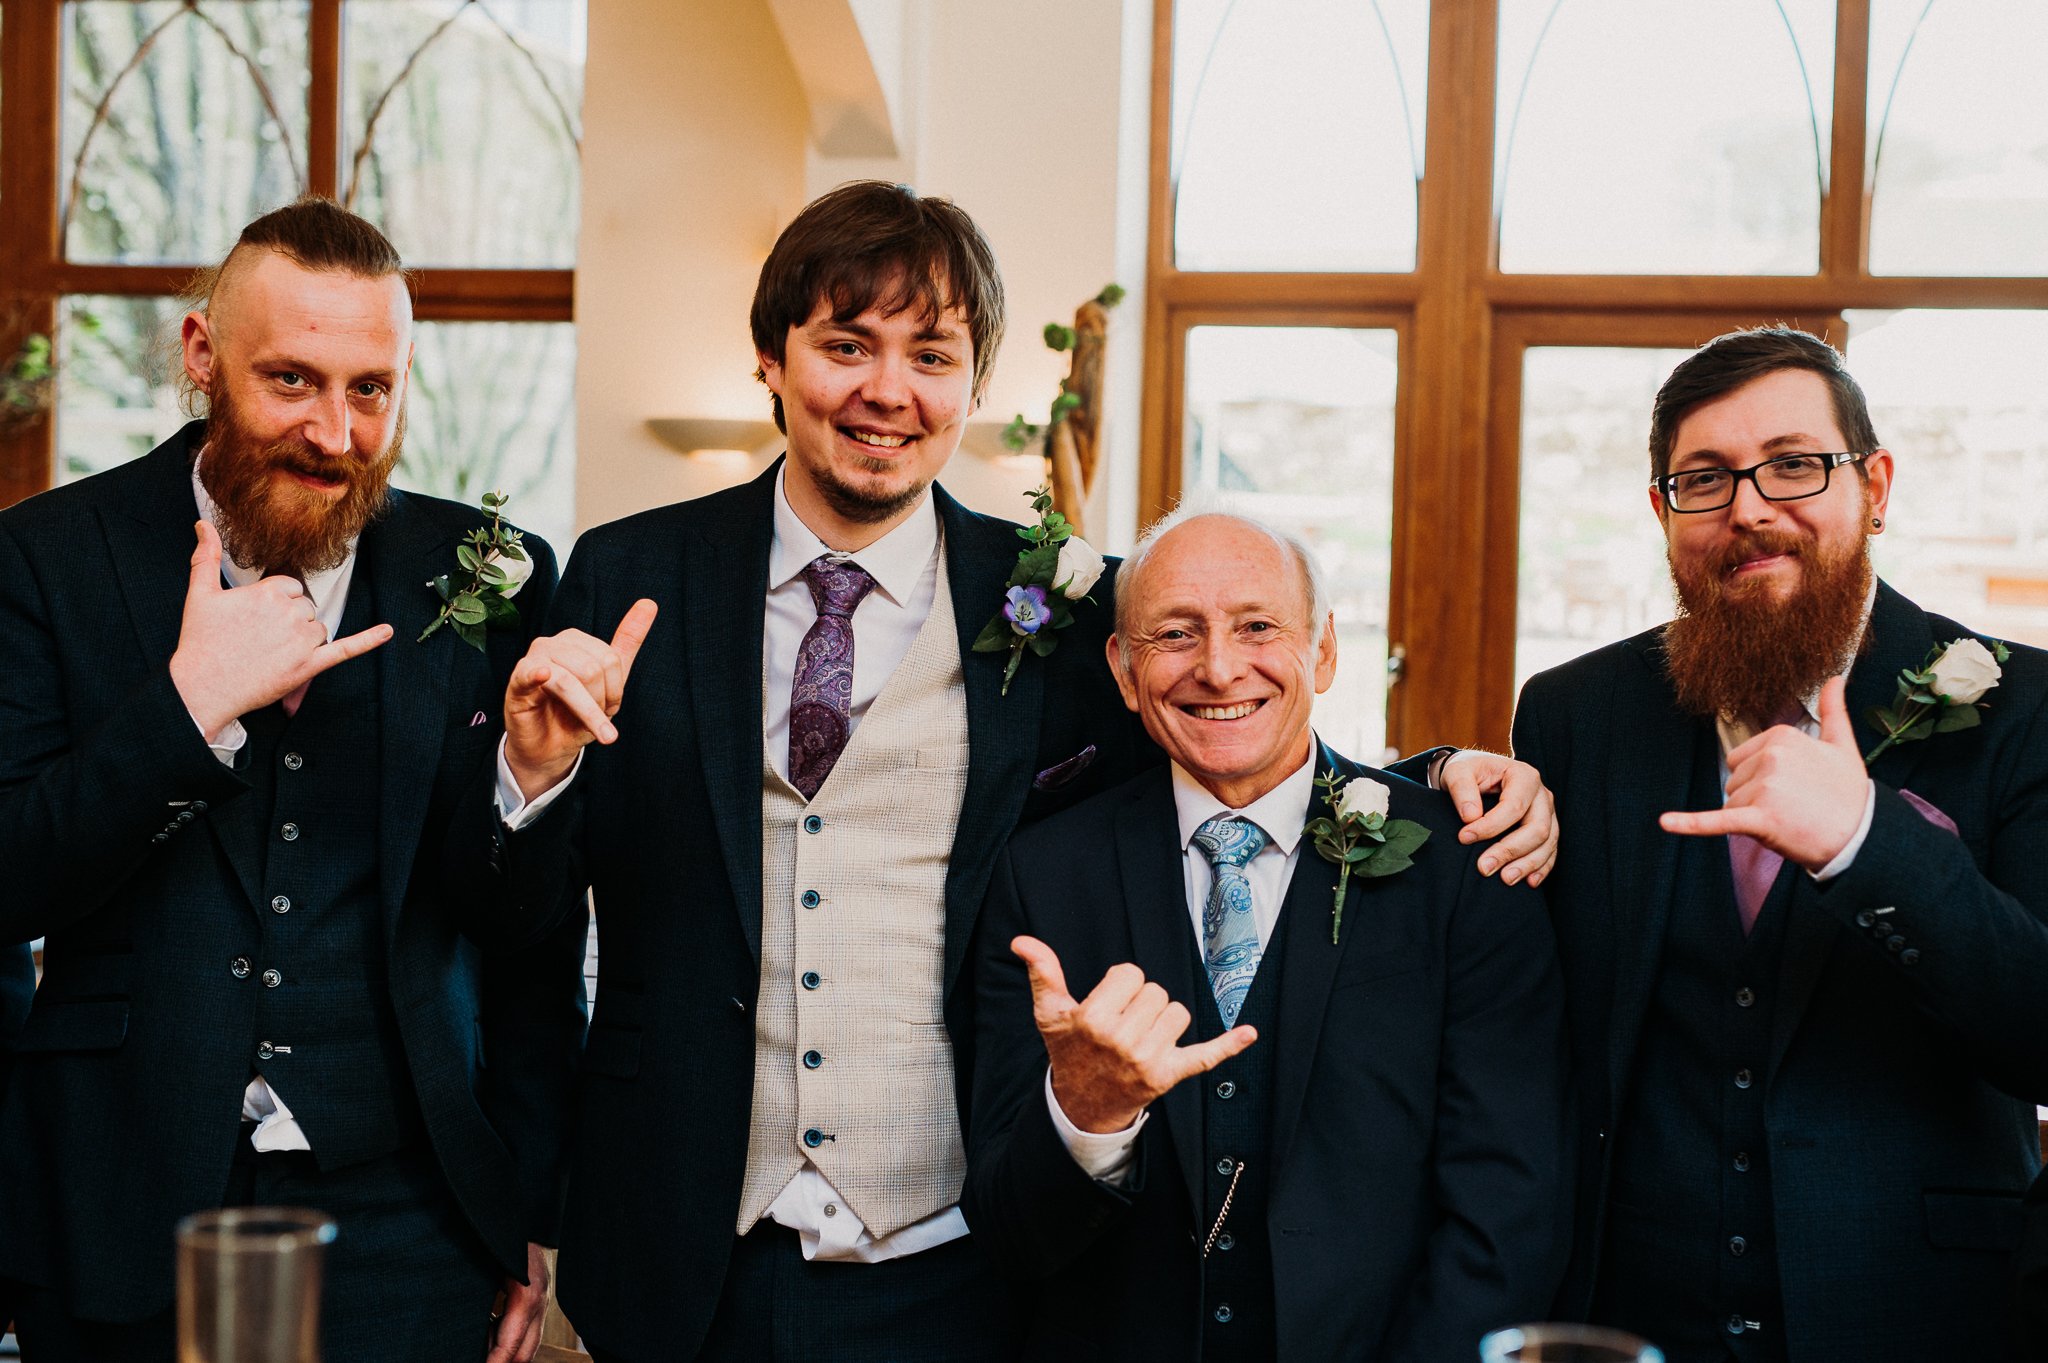 The father of the bride, the groom and some of the groom's party giving a hang ten sign at Sneaton Castle, Whitby.